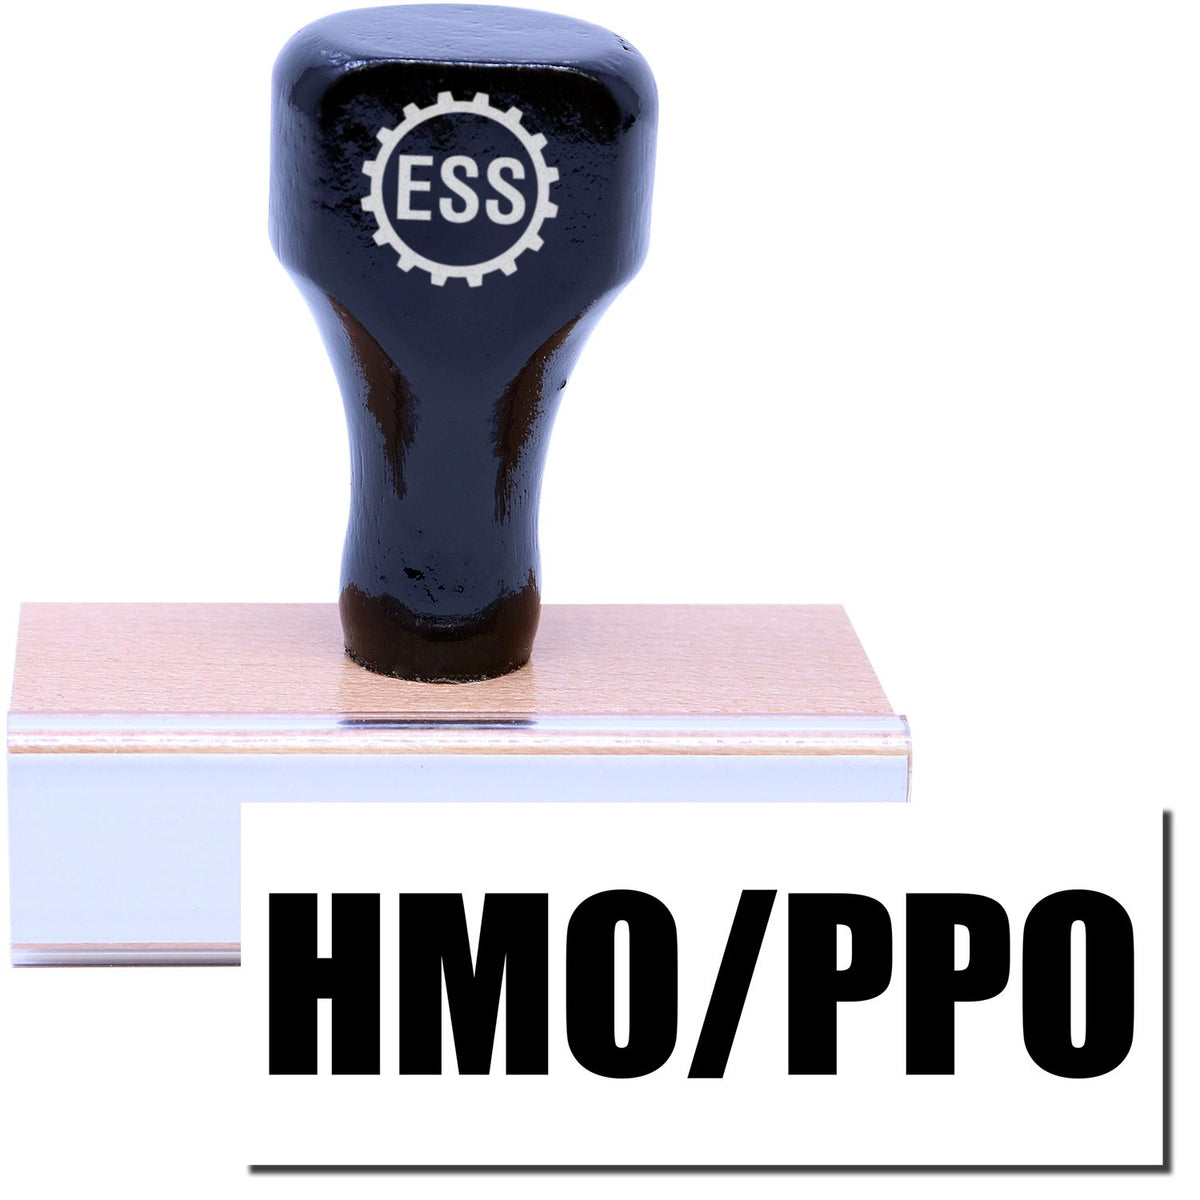 A stock office medical rubber stamp with a stamped image showing how the text &quot;HMO/PPO&quot; is displayed after stamping.